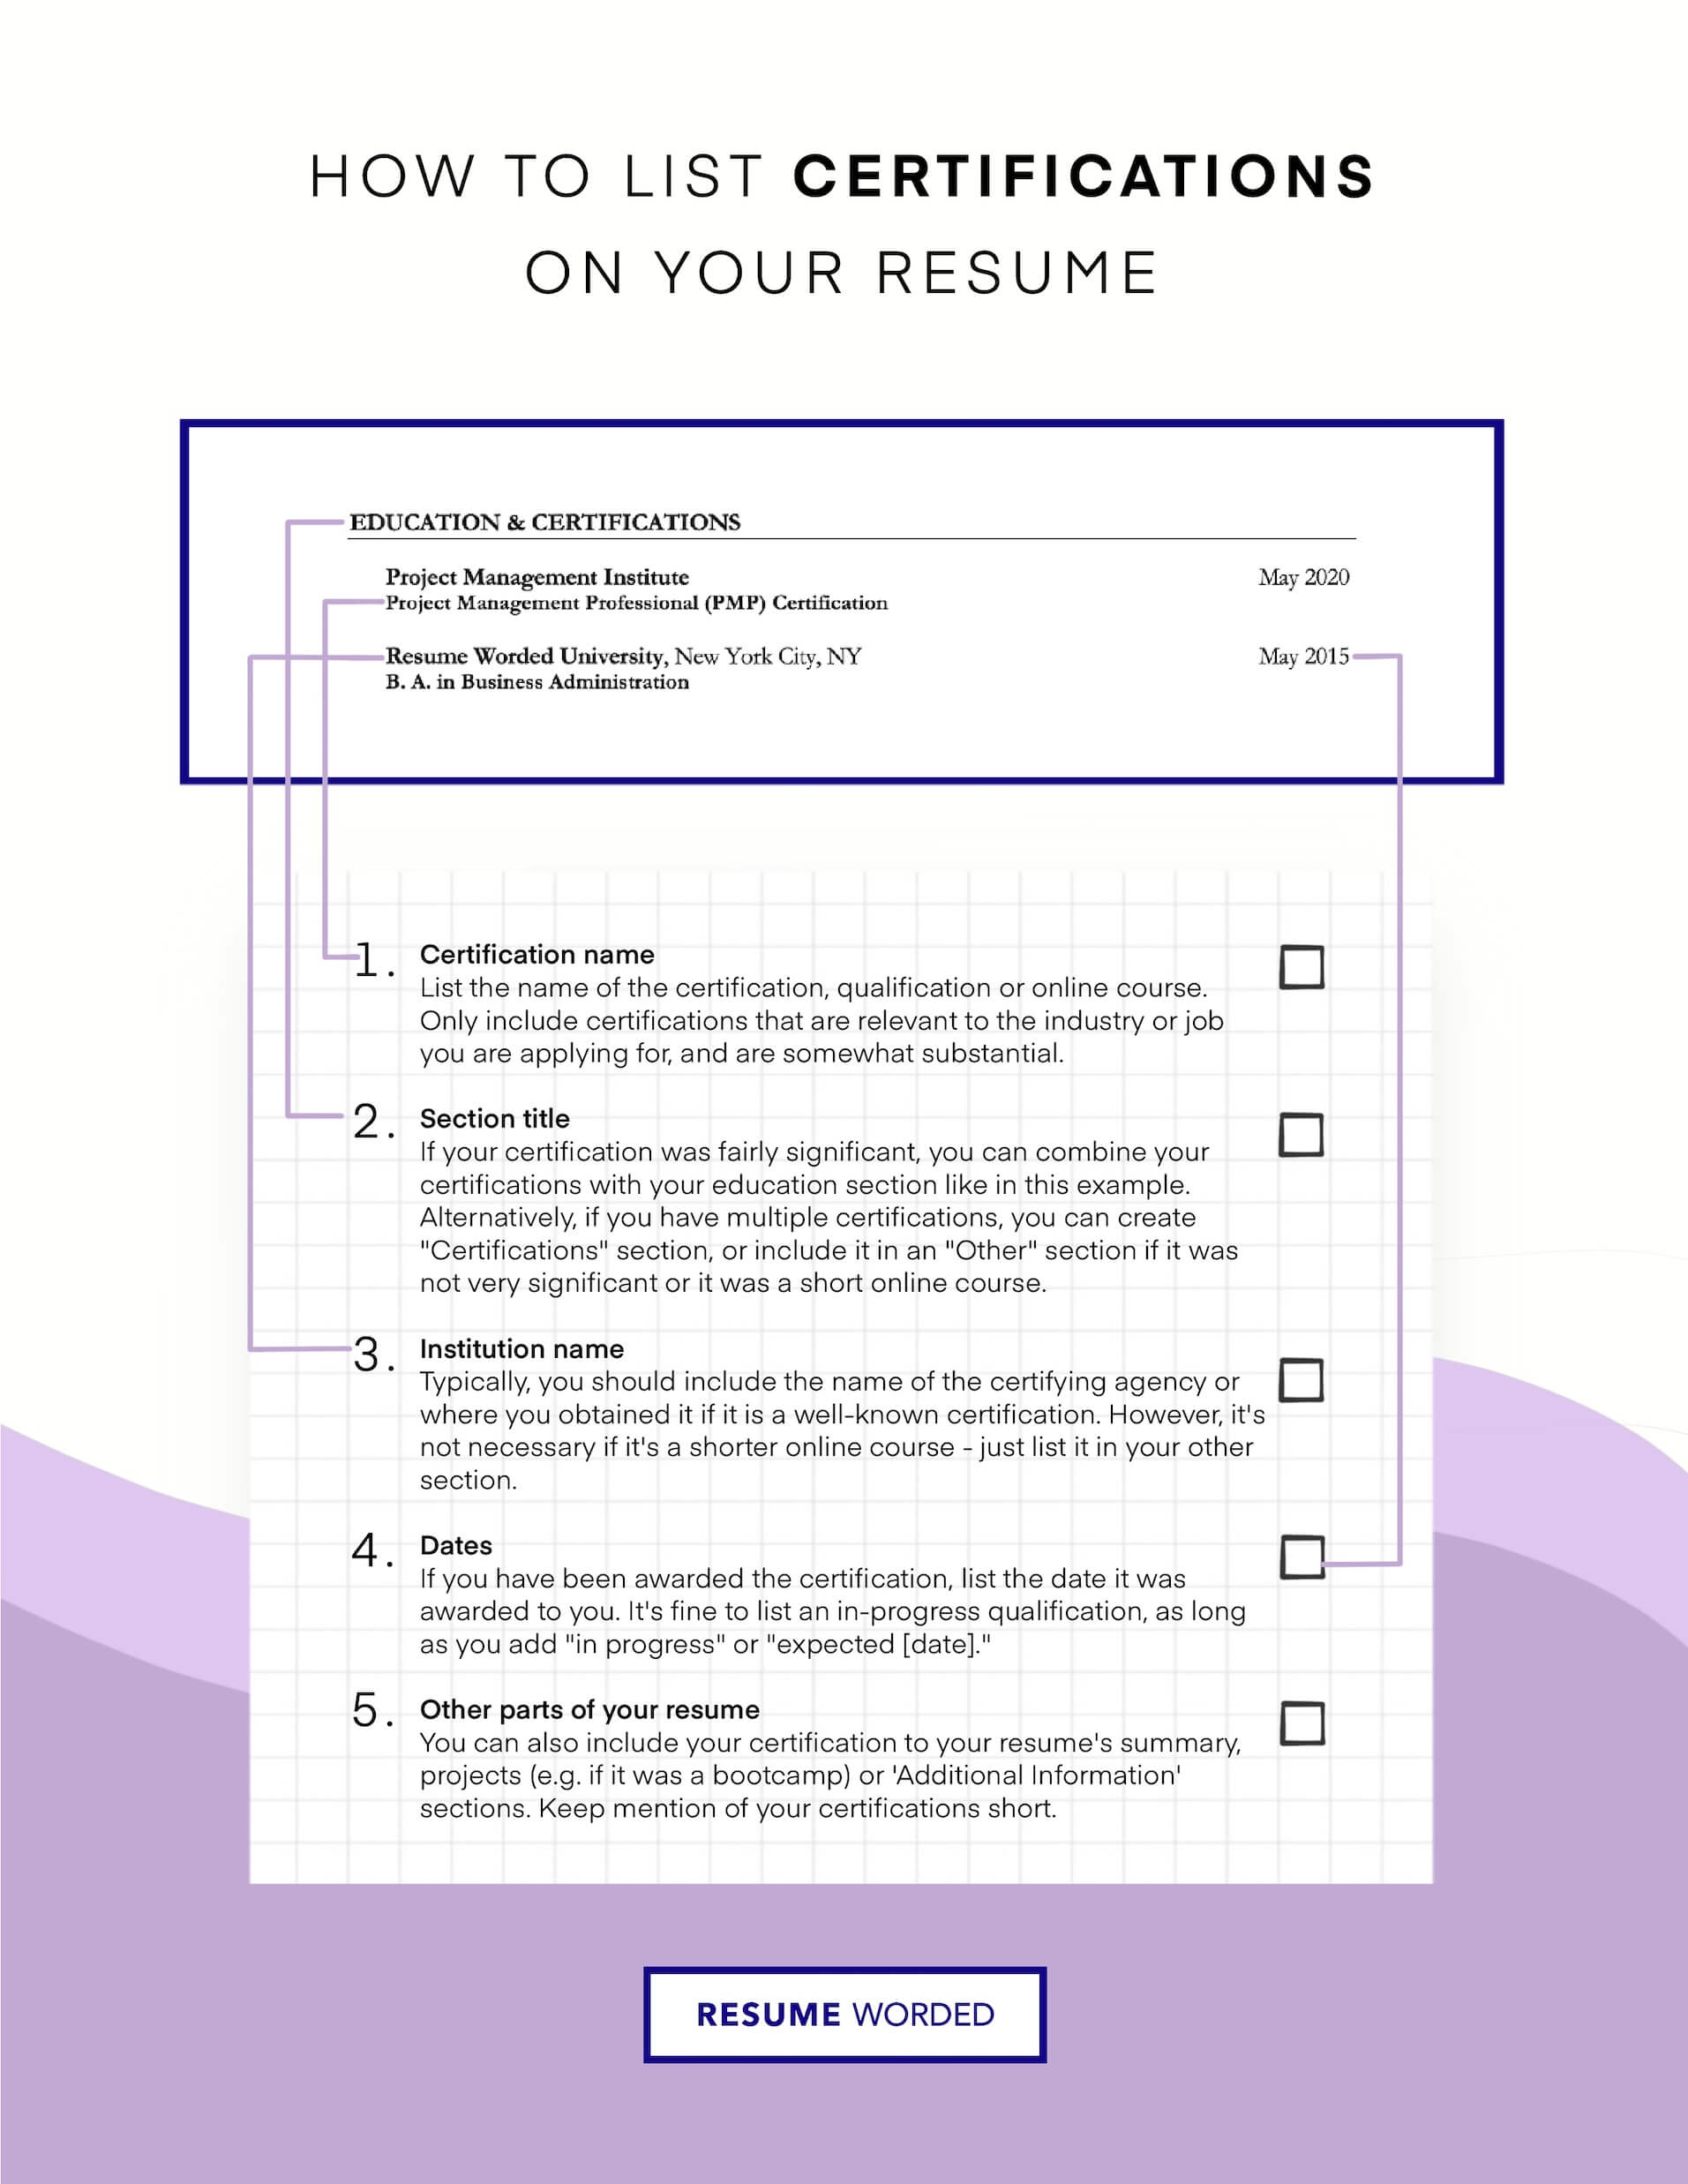 Include accounting-related certifications. - Junior Accountant Resume